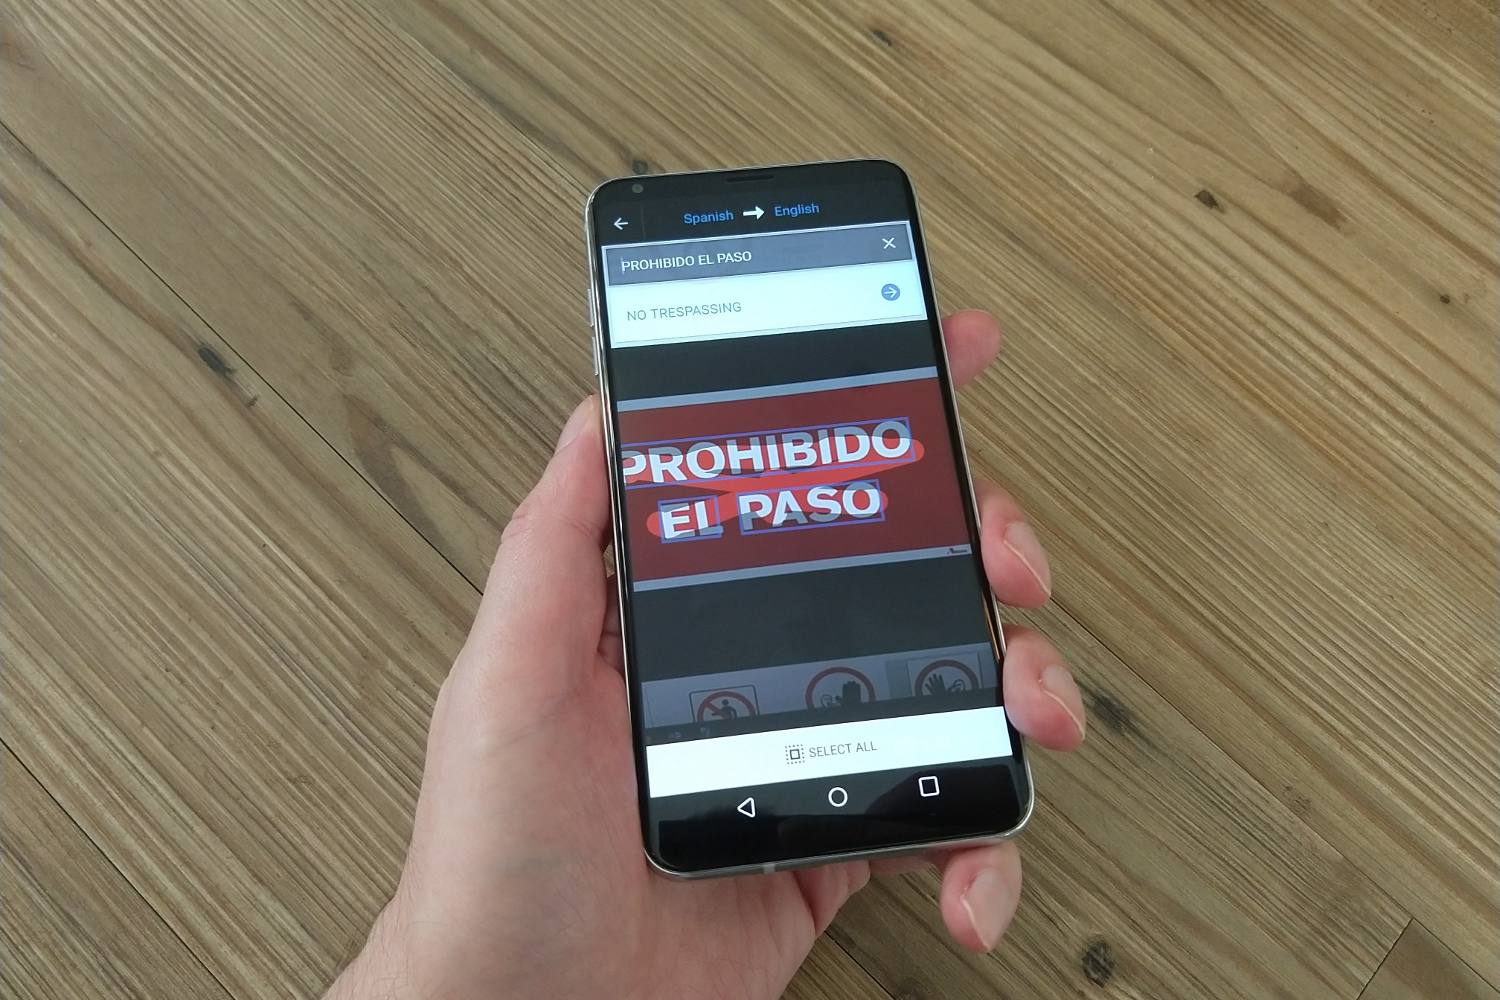 Google Translate camera makes it super easy to